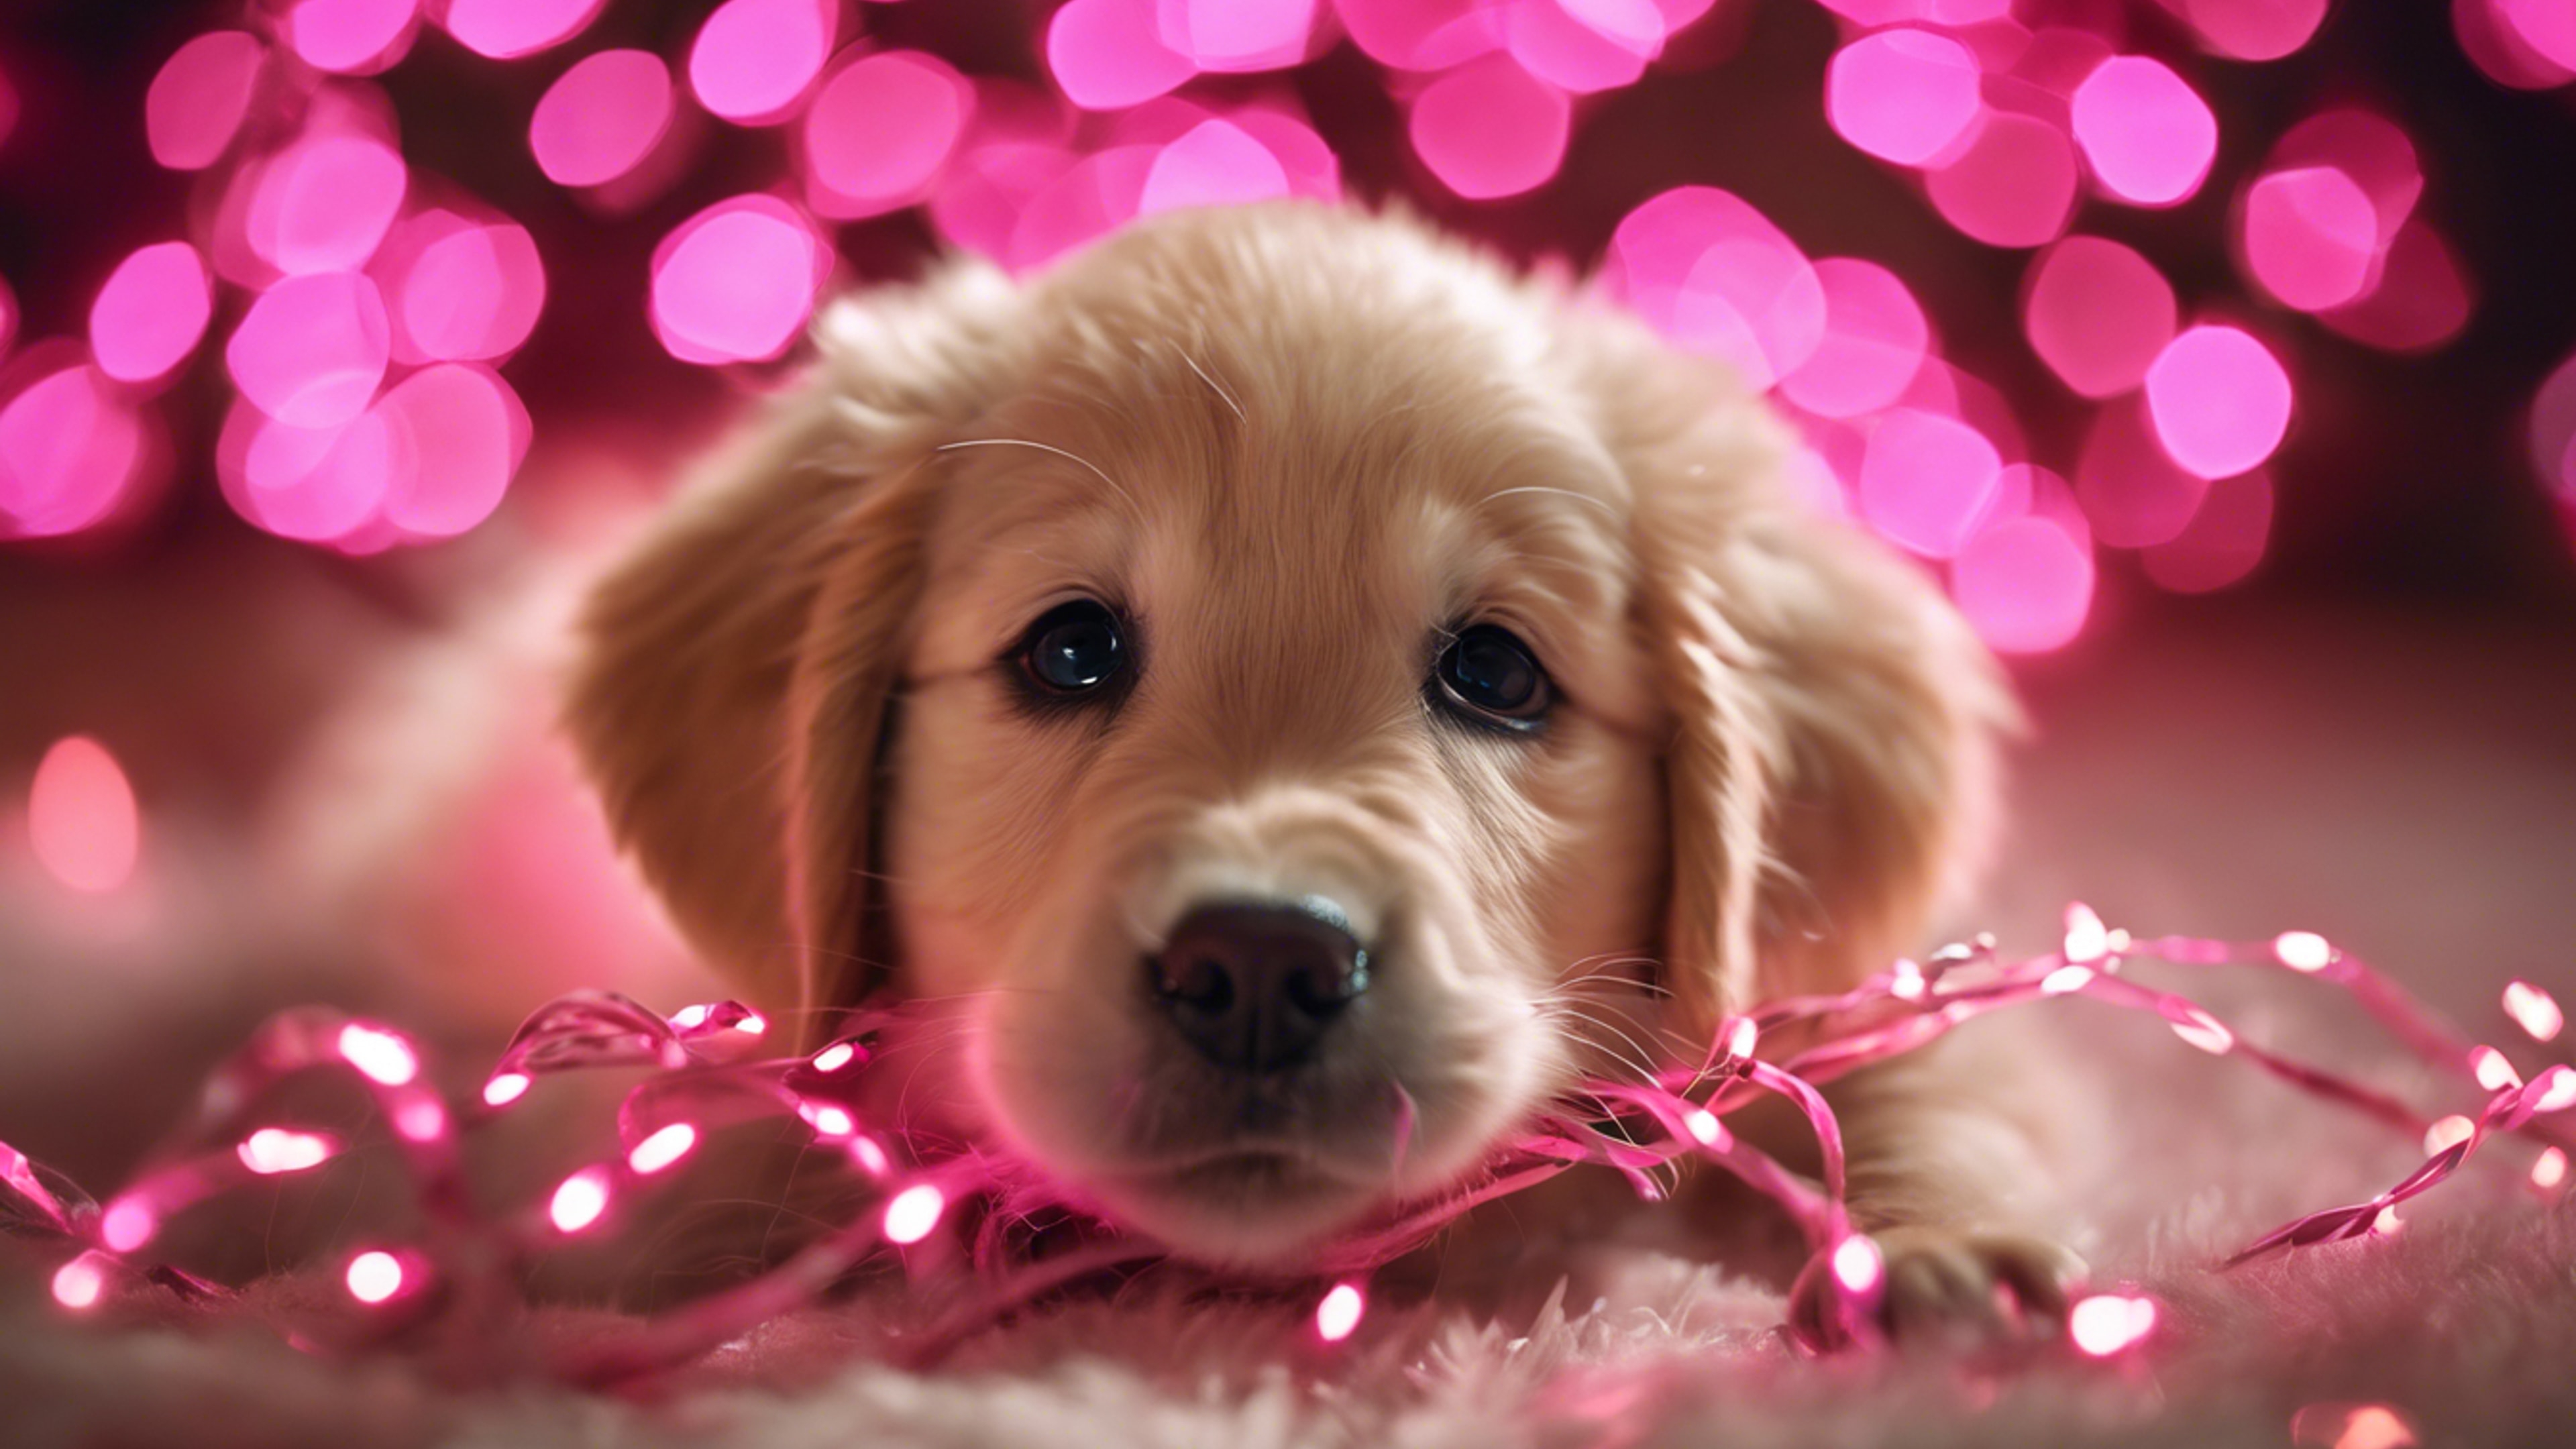 A golden retriever puppy adorably tangled in pink Christmas lights. Hintergrund[26994d3815c0460ab11e]